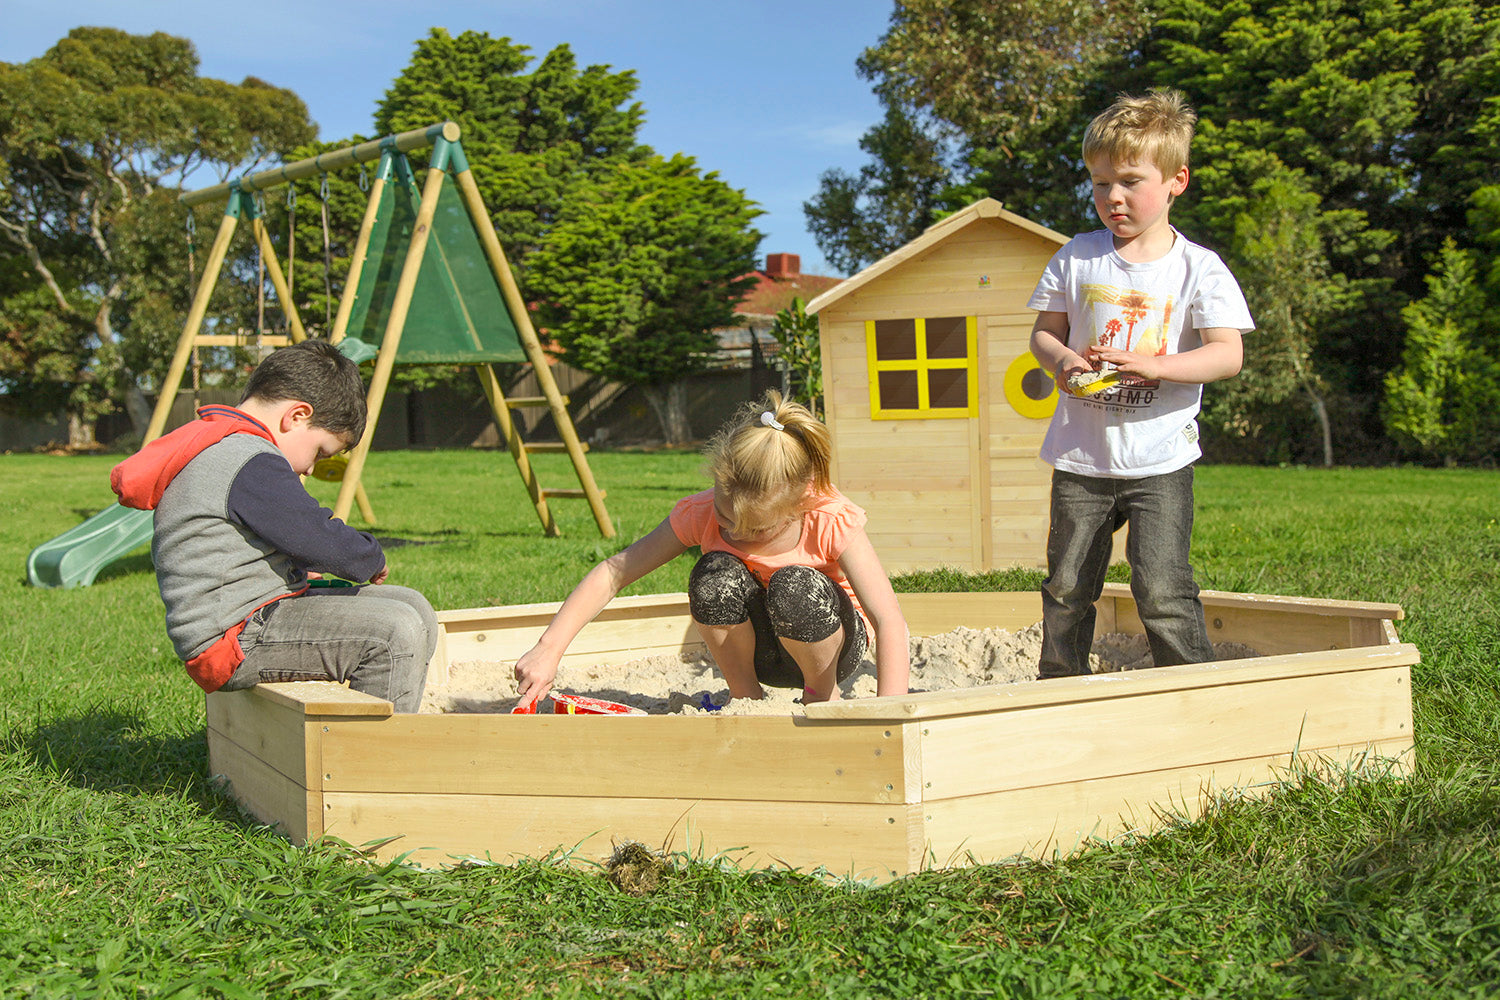 Building Teamwork: Cooperative Play in the Kids' Sandpit